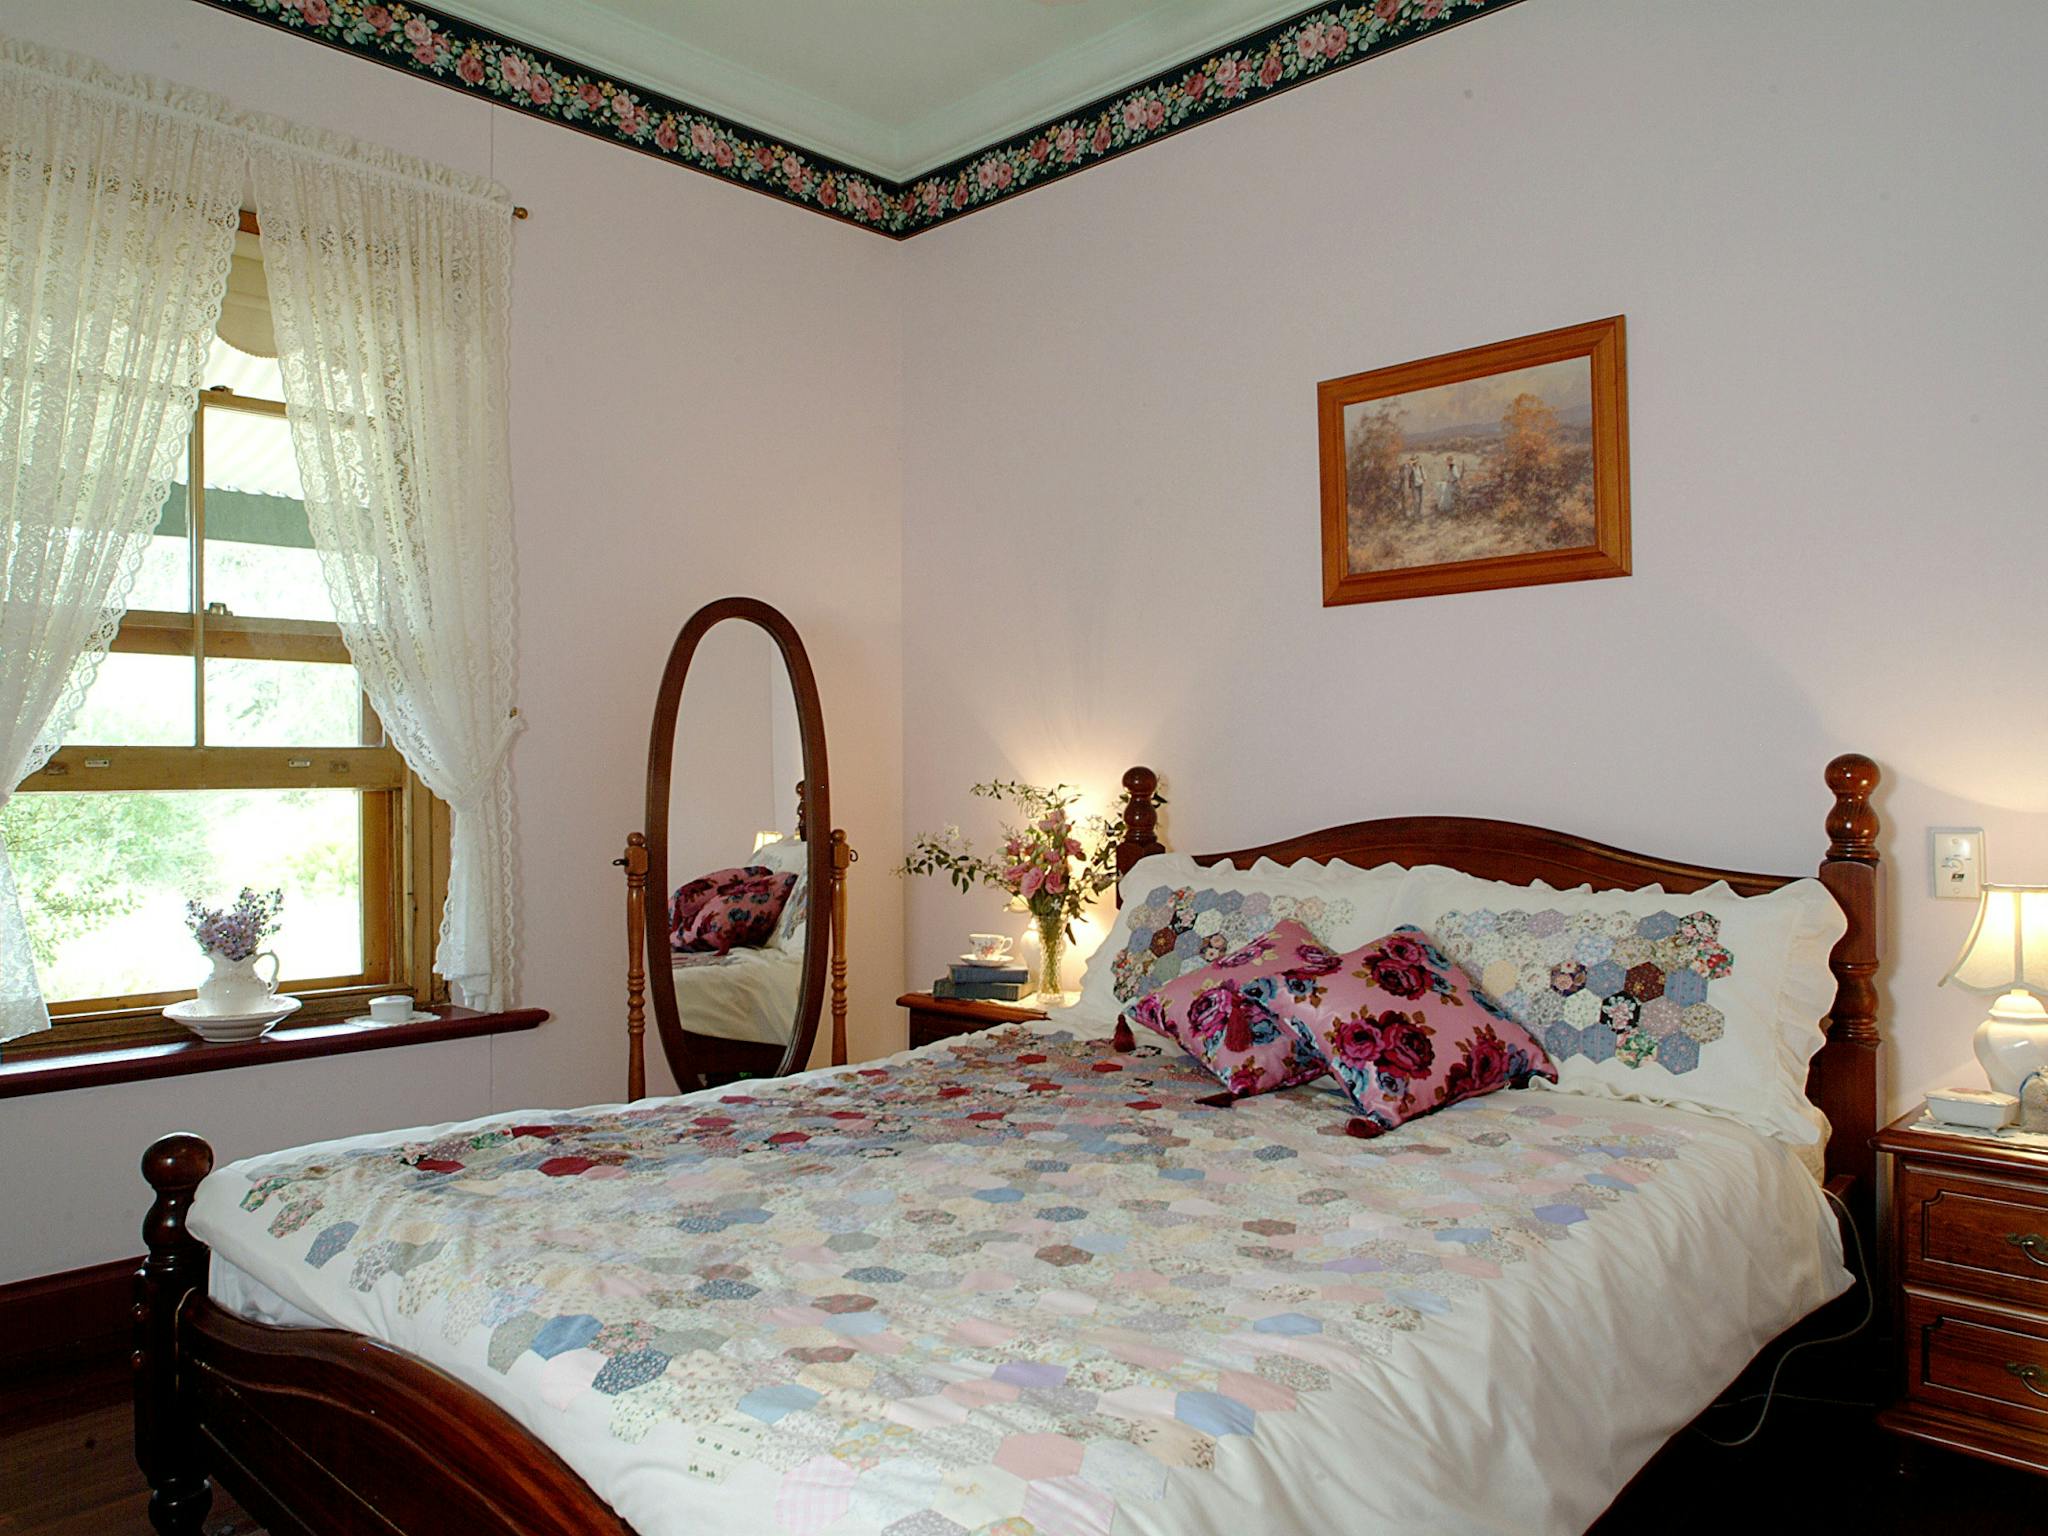 Queen size bed overlooks the cottage garden with is home to many native birds.